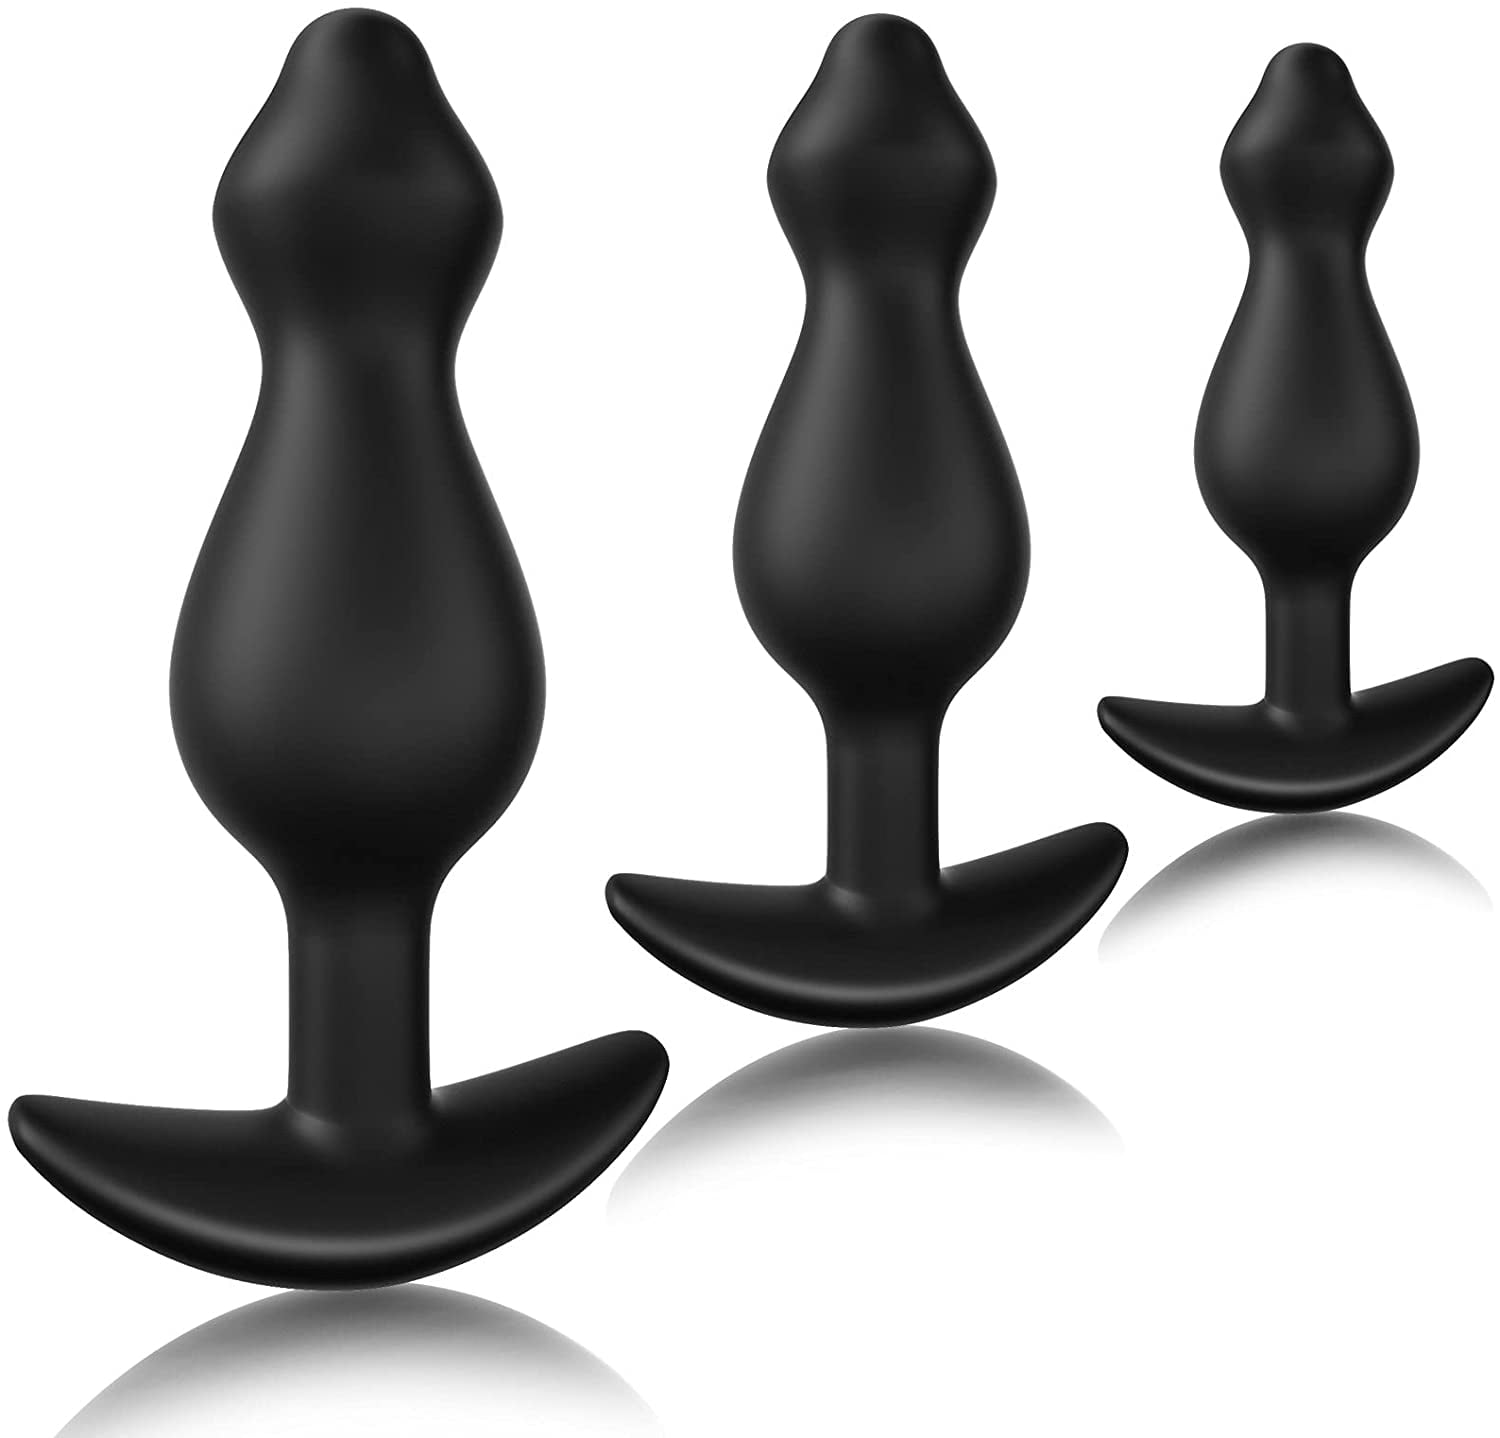 Anal Training Kit Silicone 3Pcs Comfortable Anus Butt Plug Set Anal Massaging Toy Prostate Massagers Male Female Sex Adult Toys for Couples Men Women Beginners Advanced Users Pleasure Black photo